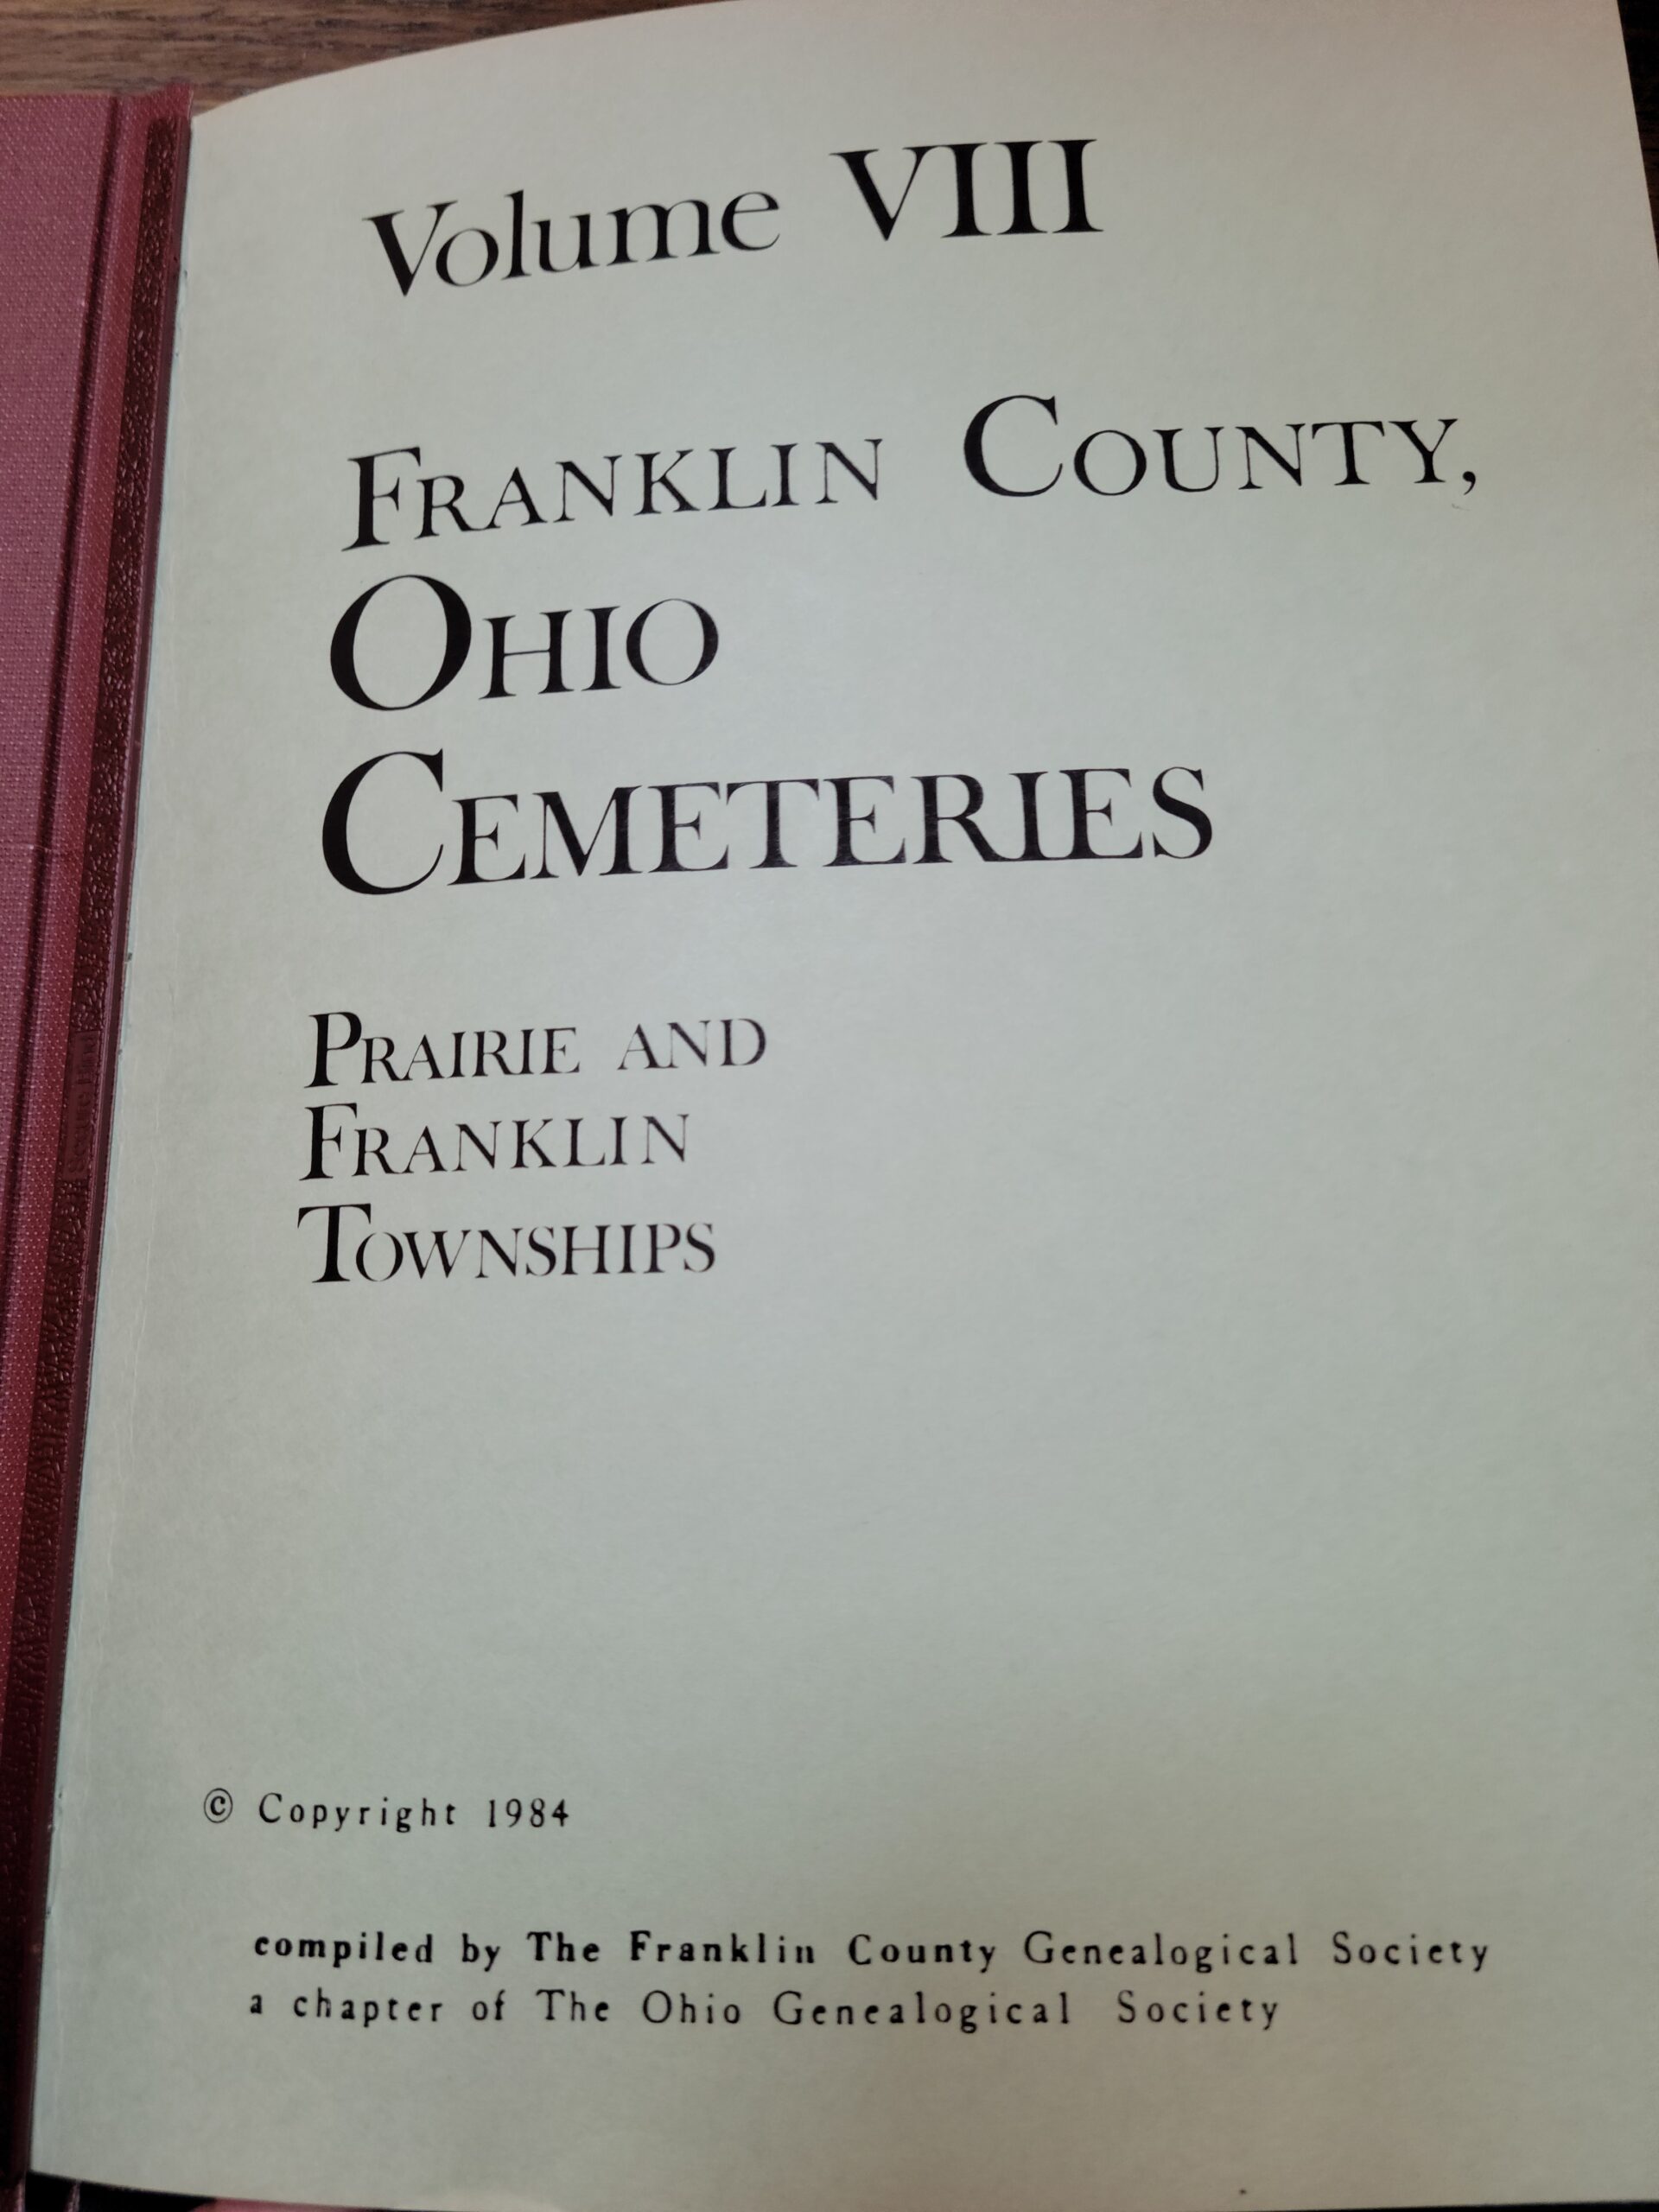 Franklin County, Ohio Cemeteries, Prairie and Franklin Townships, Volume VIII by the Franklin County Genealogical Society ©1984, available at the Ohio History Connection Archives & Library Research Room